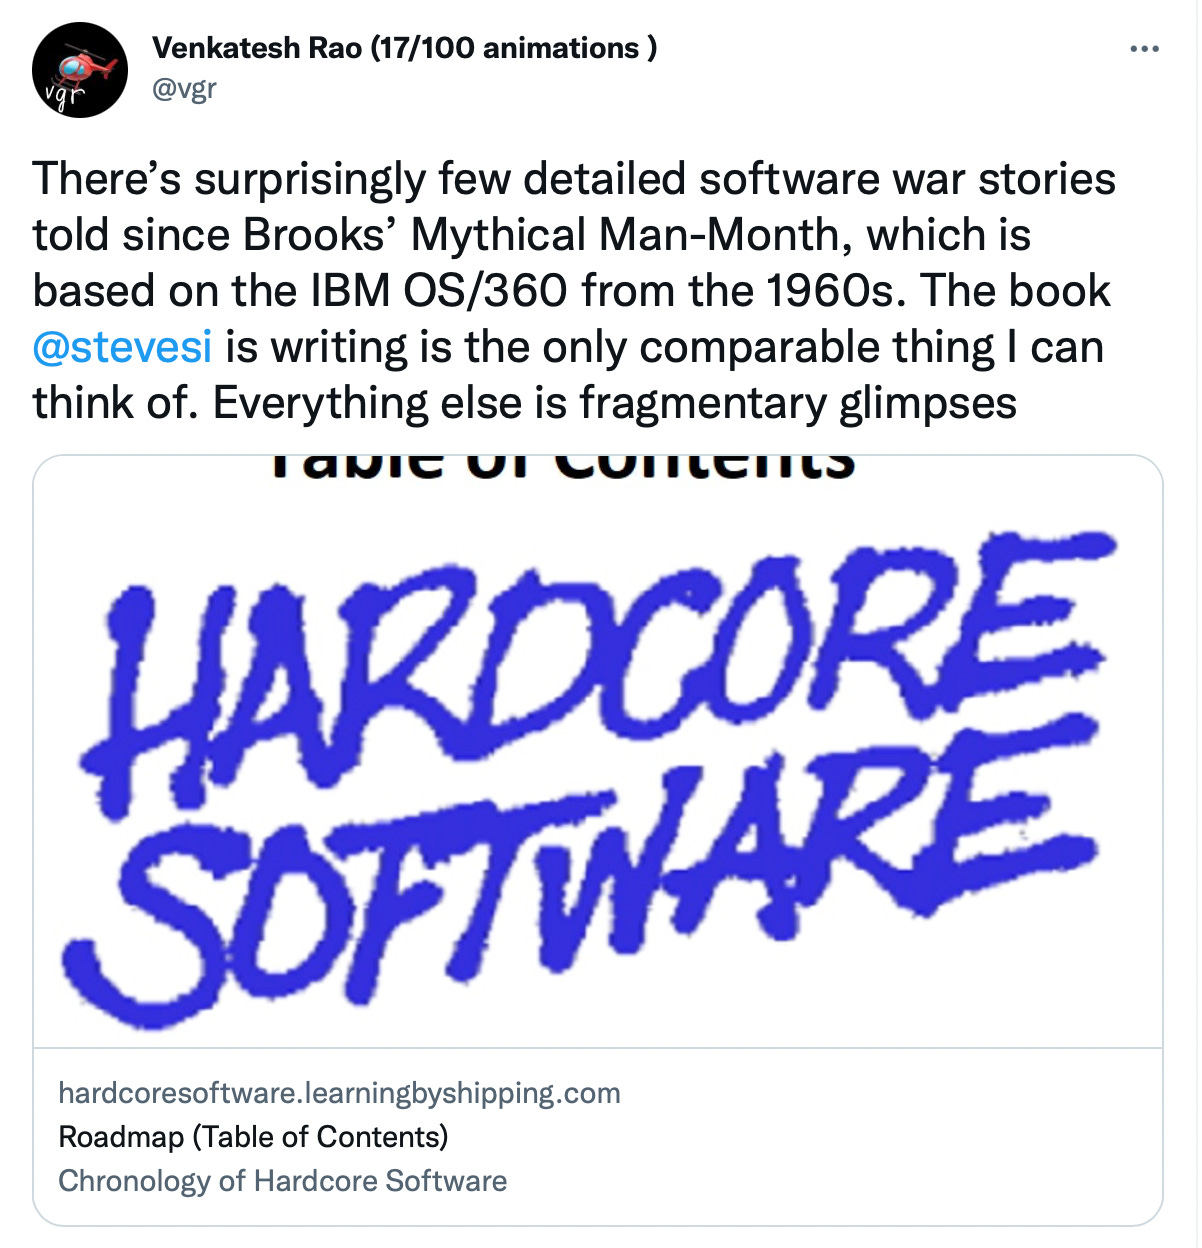 There’s surprisingly few detailed software war stories told since Brooks’ Mythical Man-Month, which is based on the IBM OS/360 from the 1960s. The book @stevesi is writing is the only comparable thing I can think of. Everything else is fragmentary glimpses